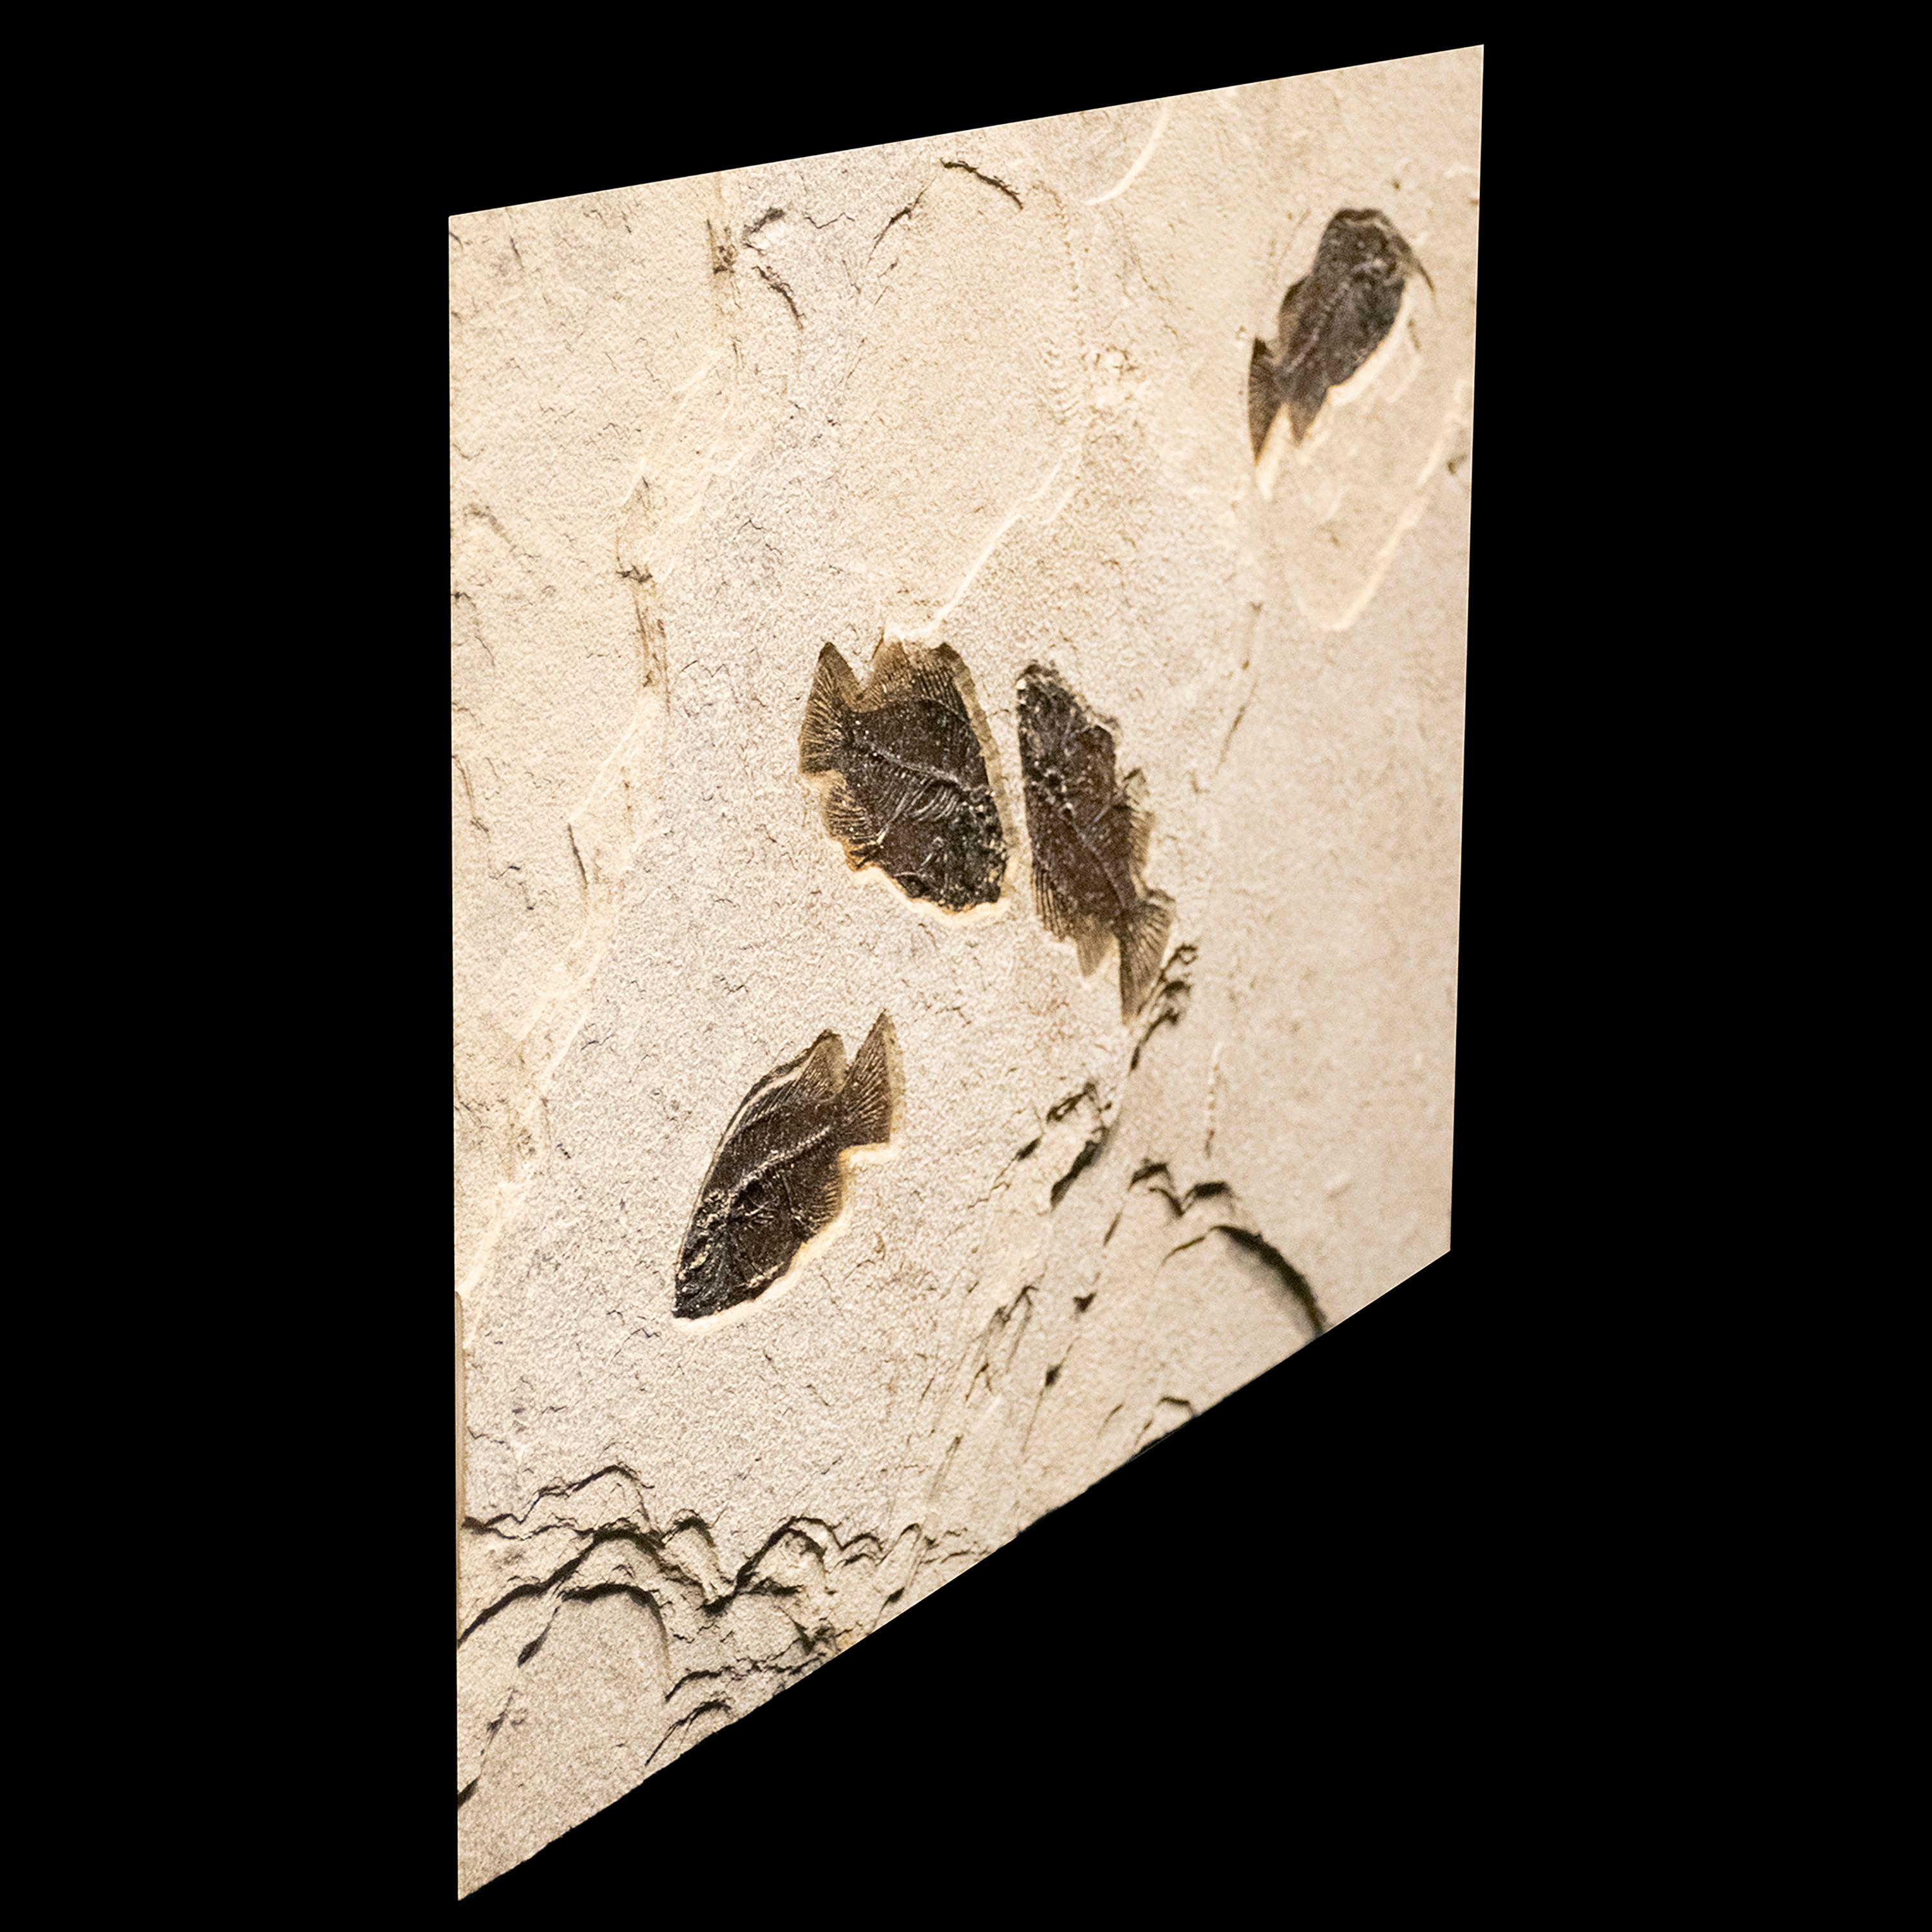 Contemporary 50 Million Year Old Eocene Era Fossil Fish Mural in Stone, from Wyoming